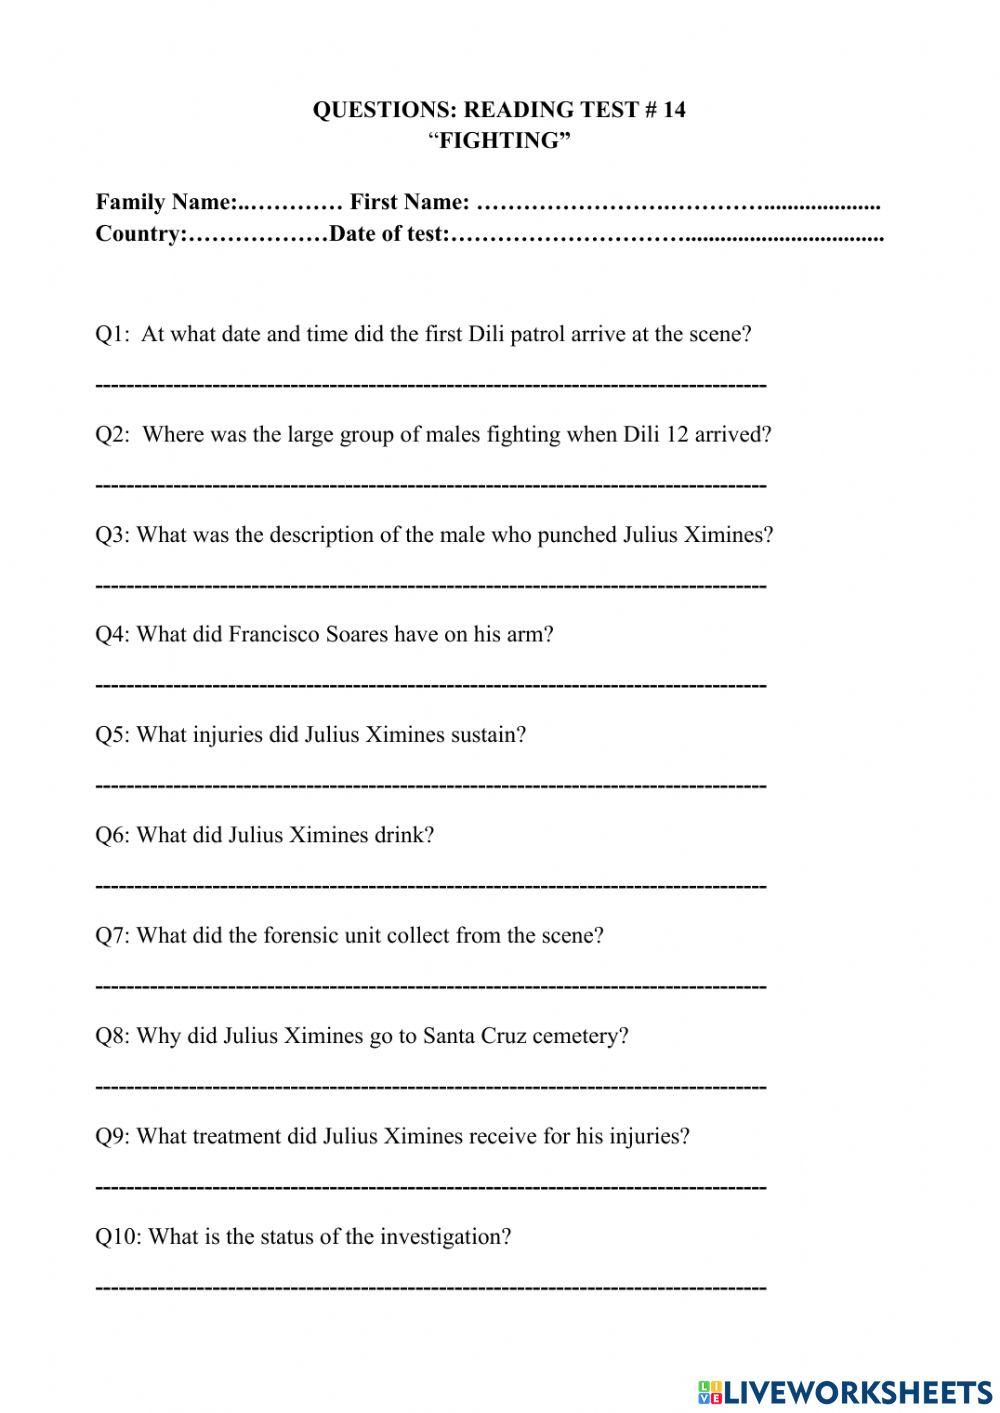 Reading comprehension test - 14 “fighting”